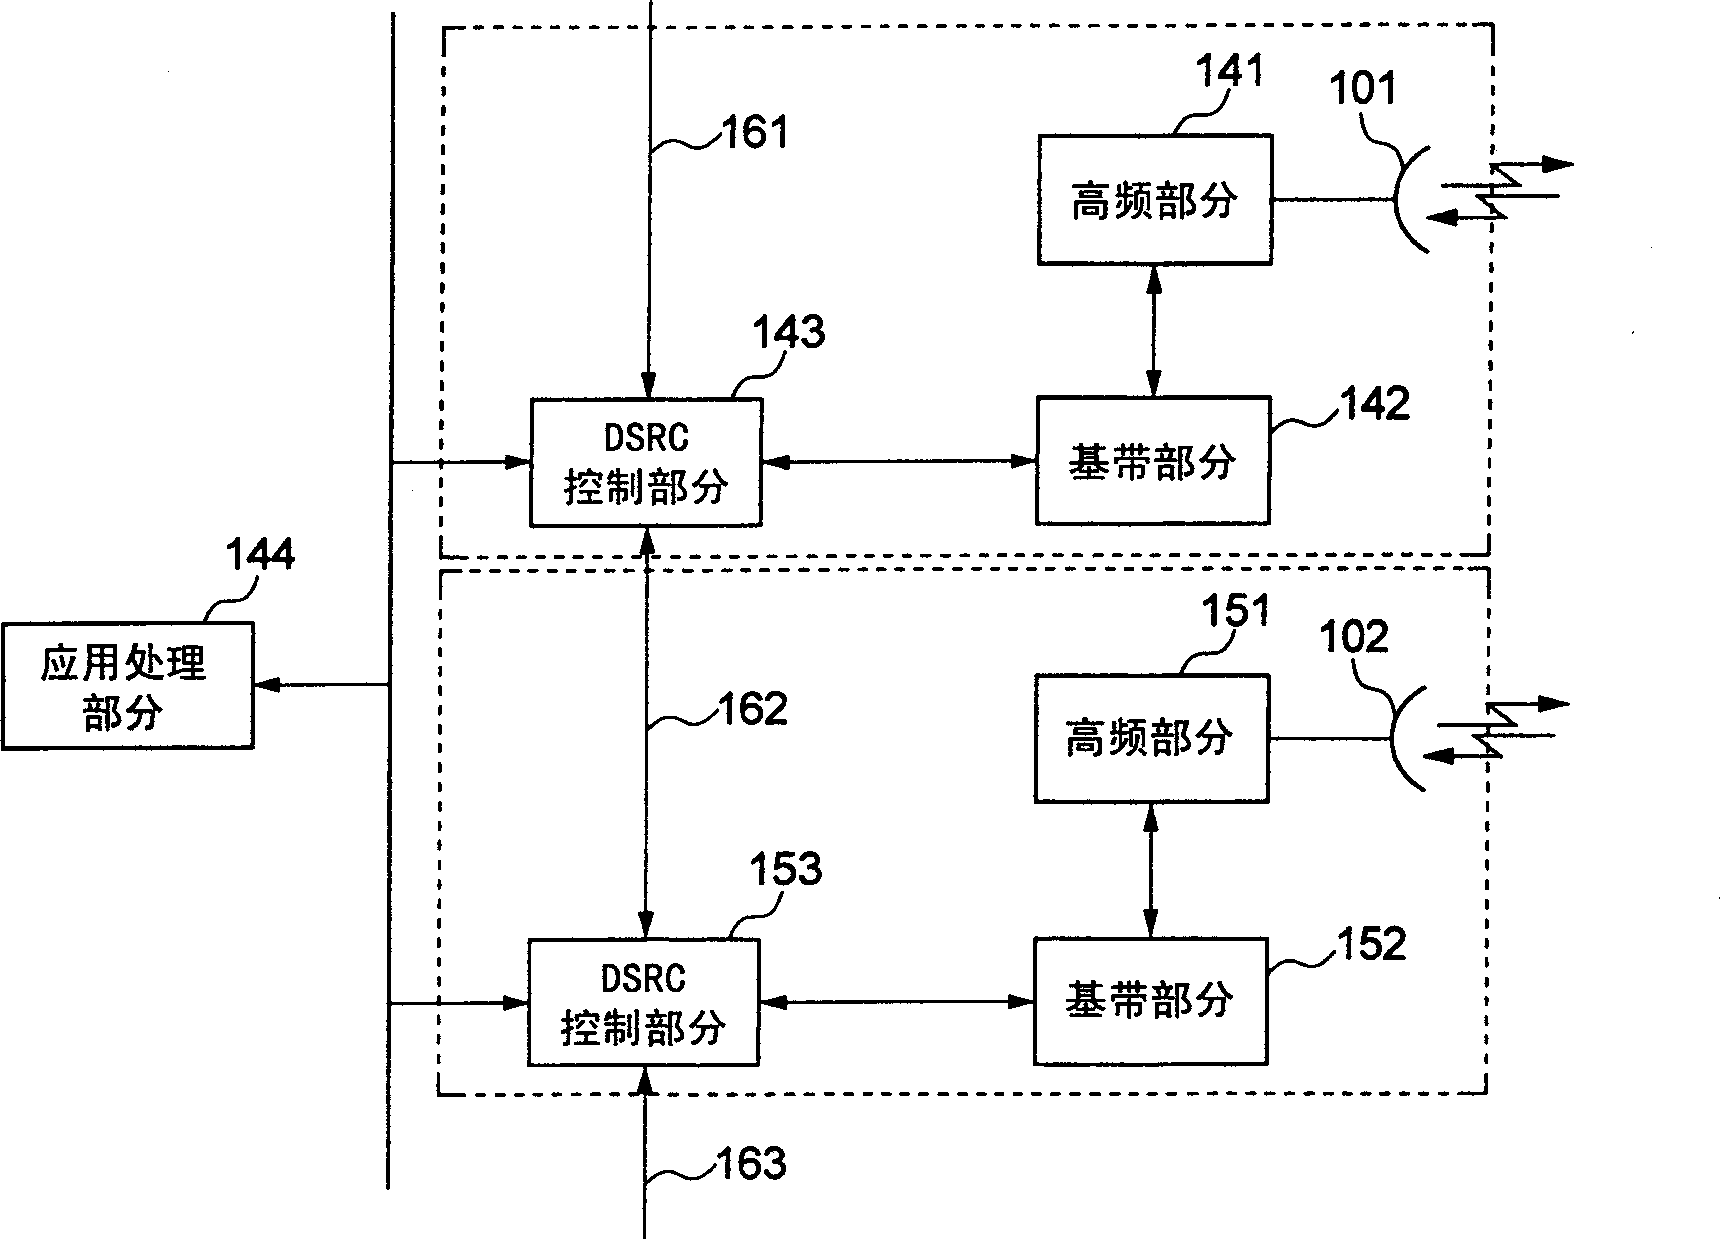 Short-distance wireless continuous communication method and system